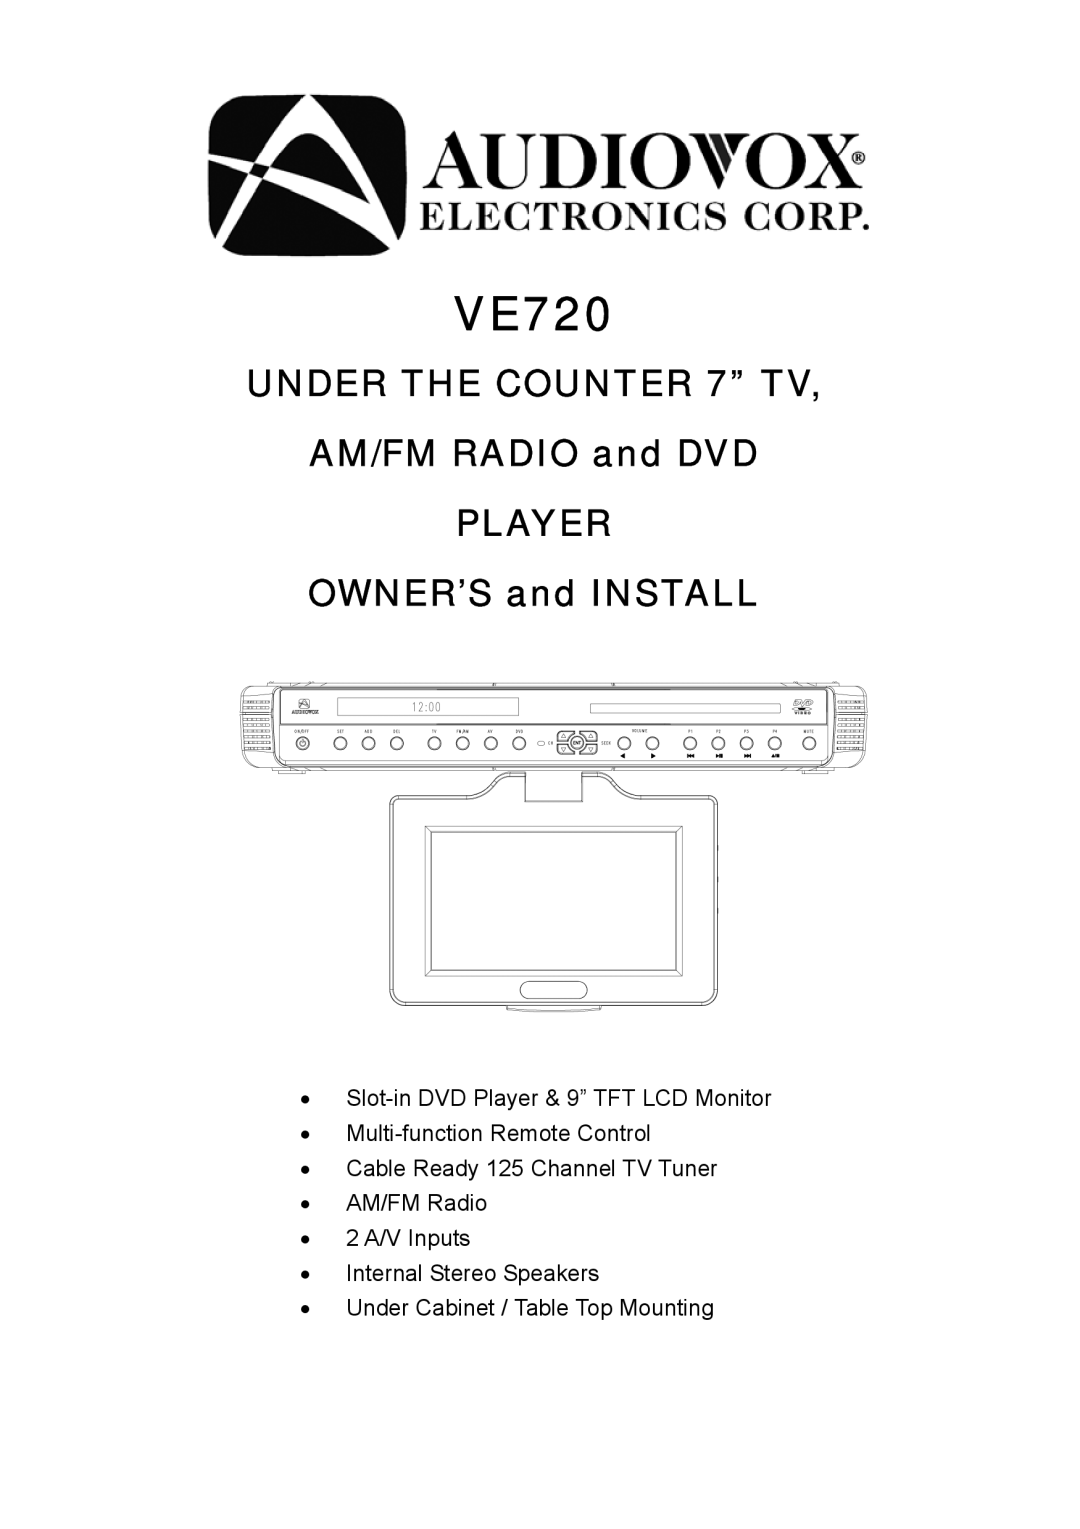 Audiovox VE720 manual UNDER THE COUNTER 7” TV AM/FM RADIO and DVD PLAYER, OWNER’S and INSTALL 